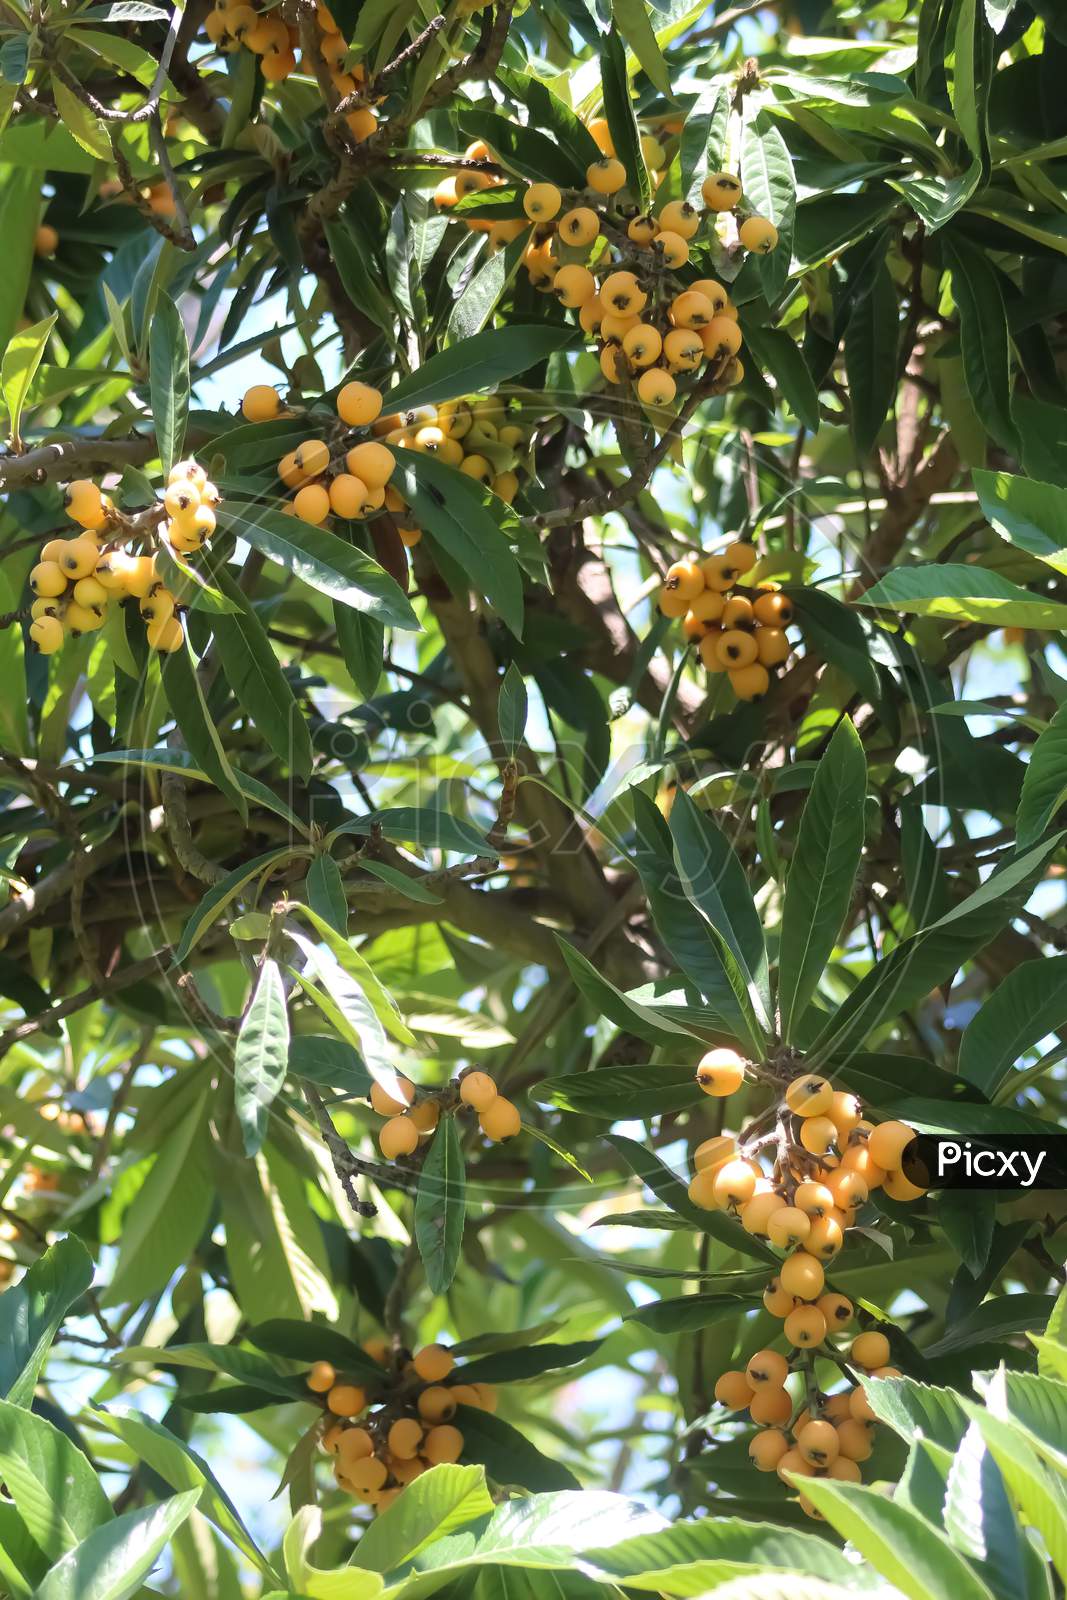 Bunches of loquat